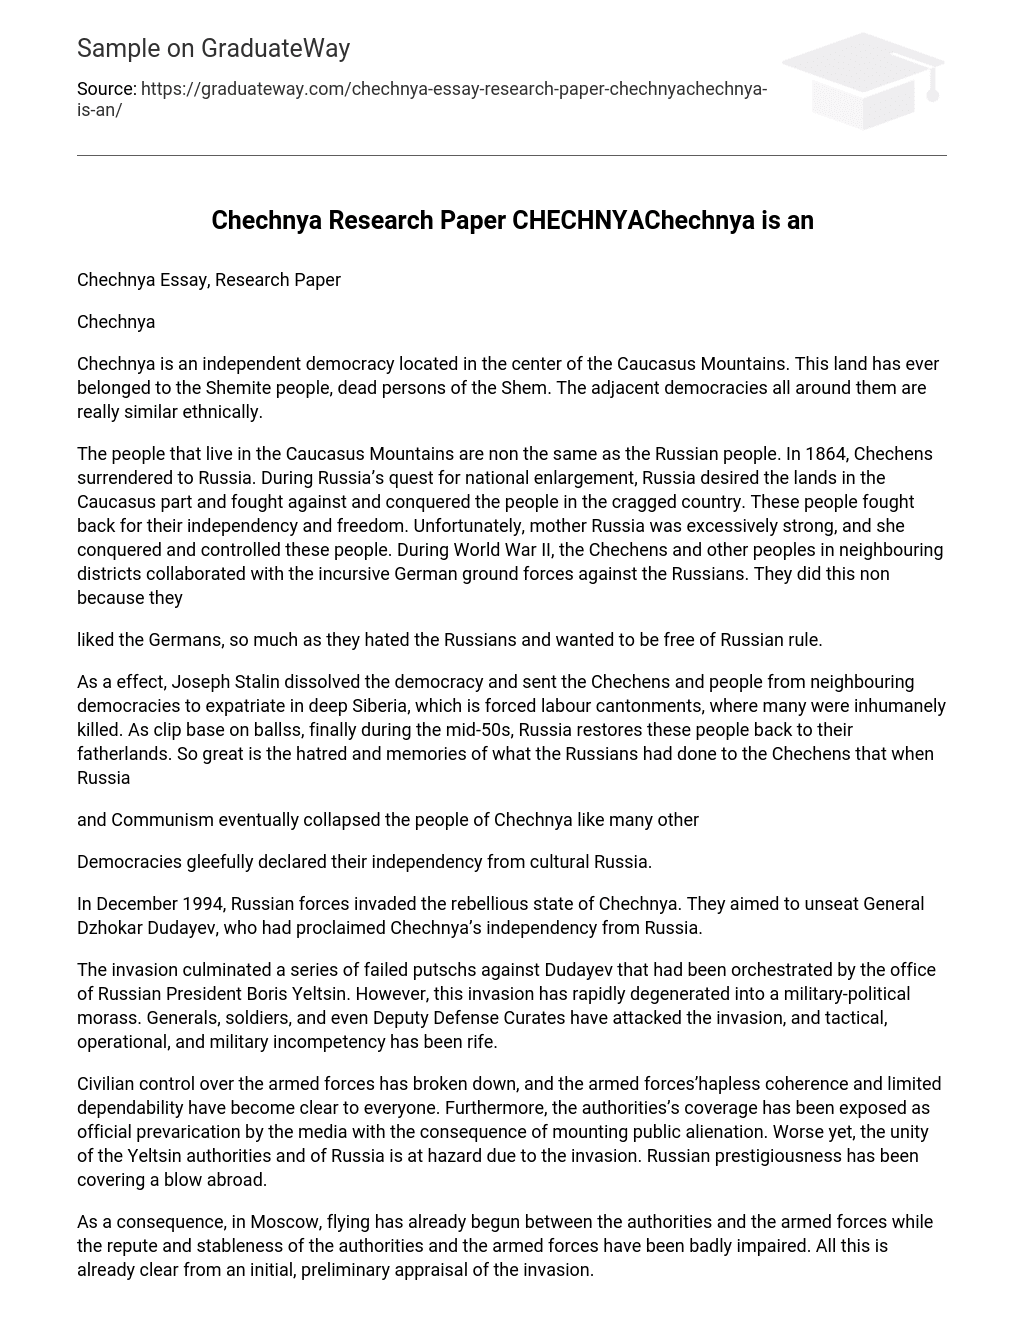 Chechnya Research Paper